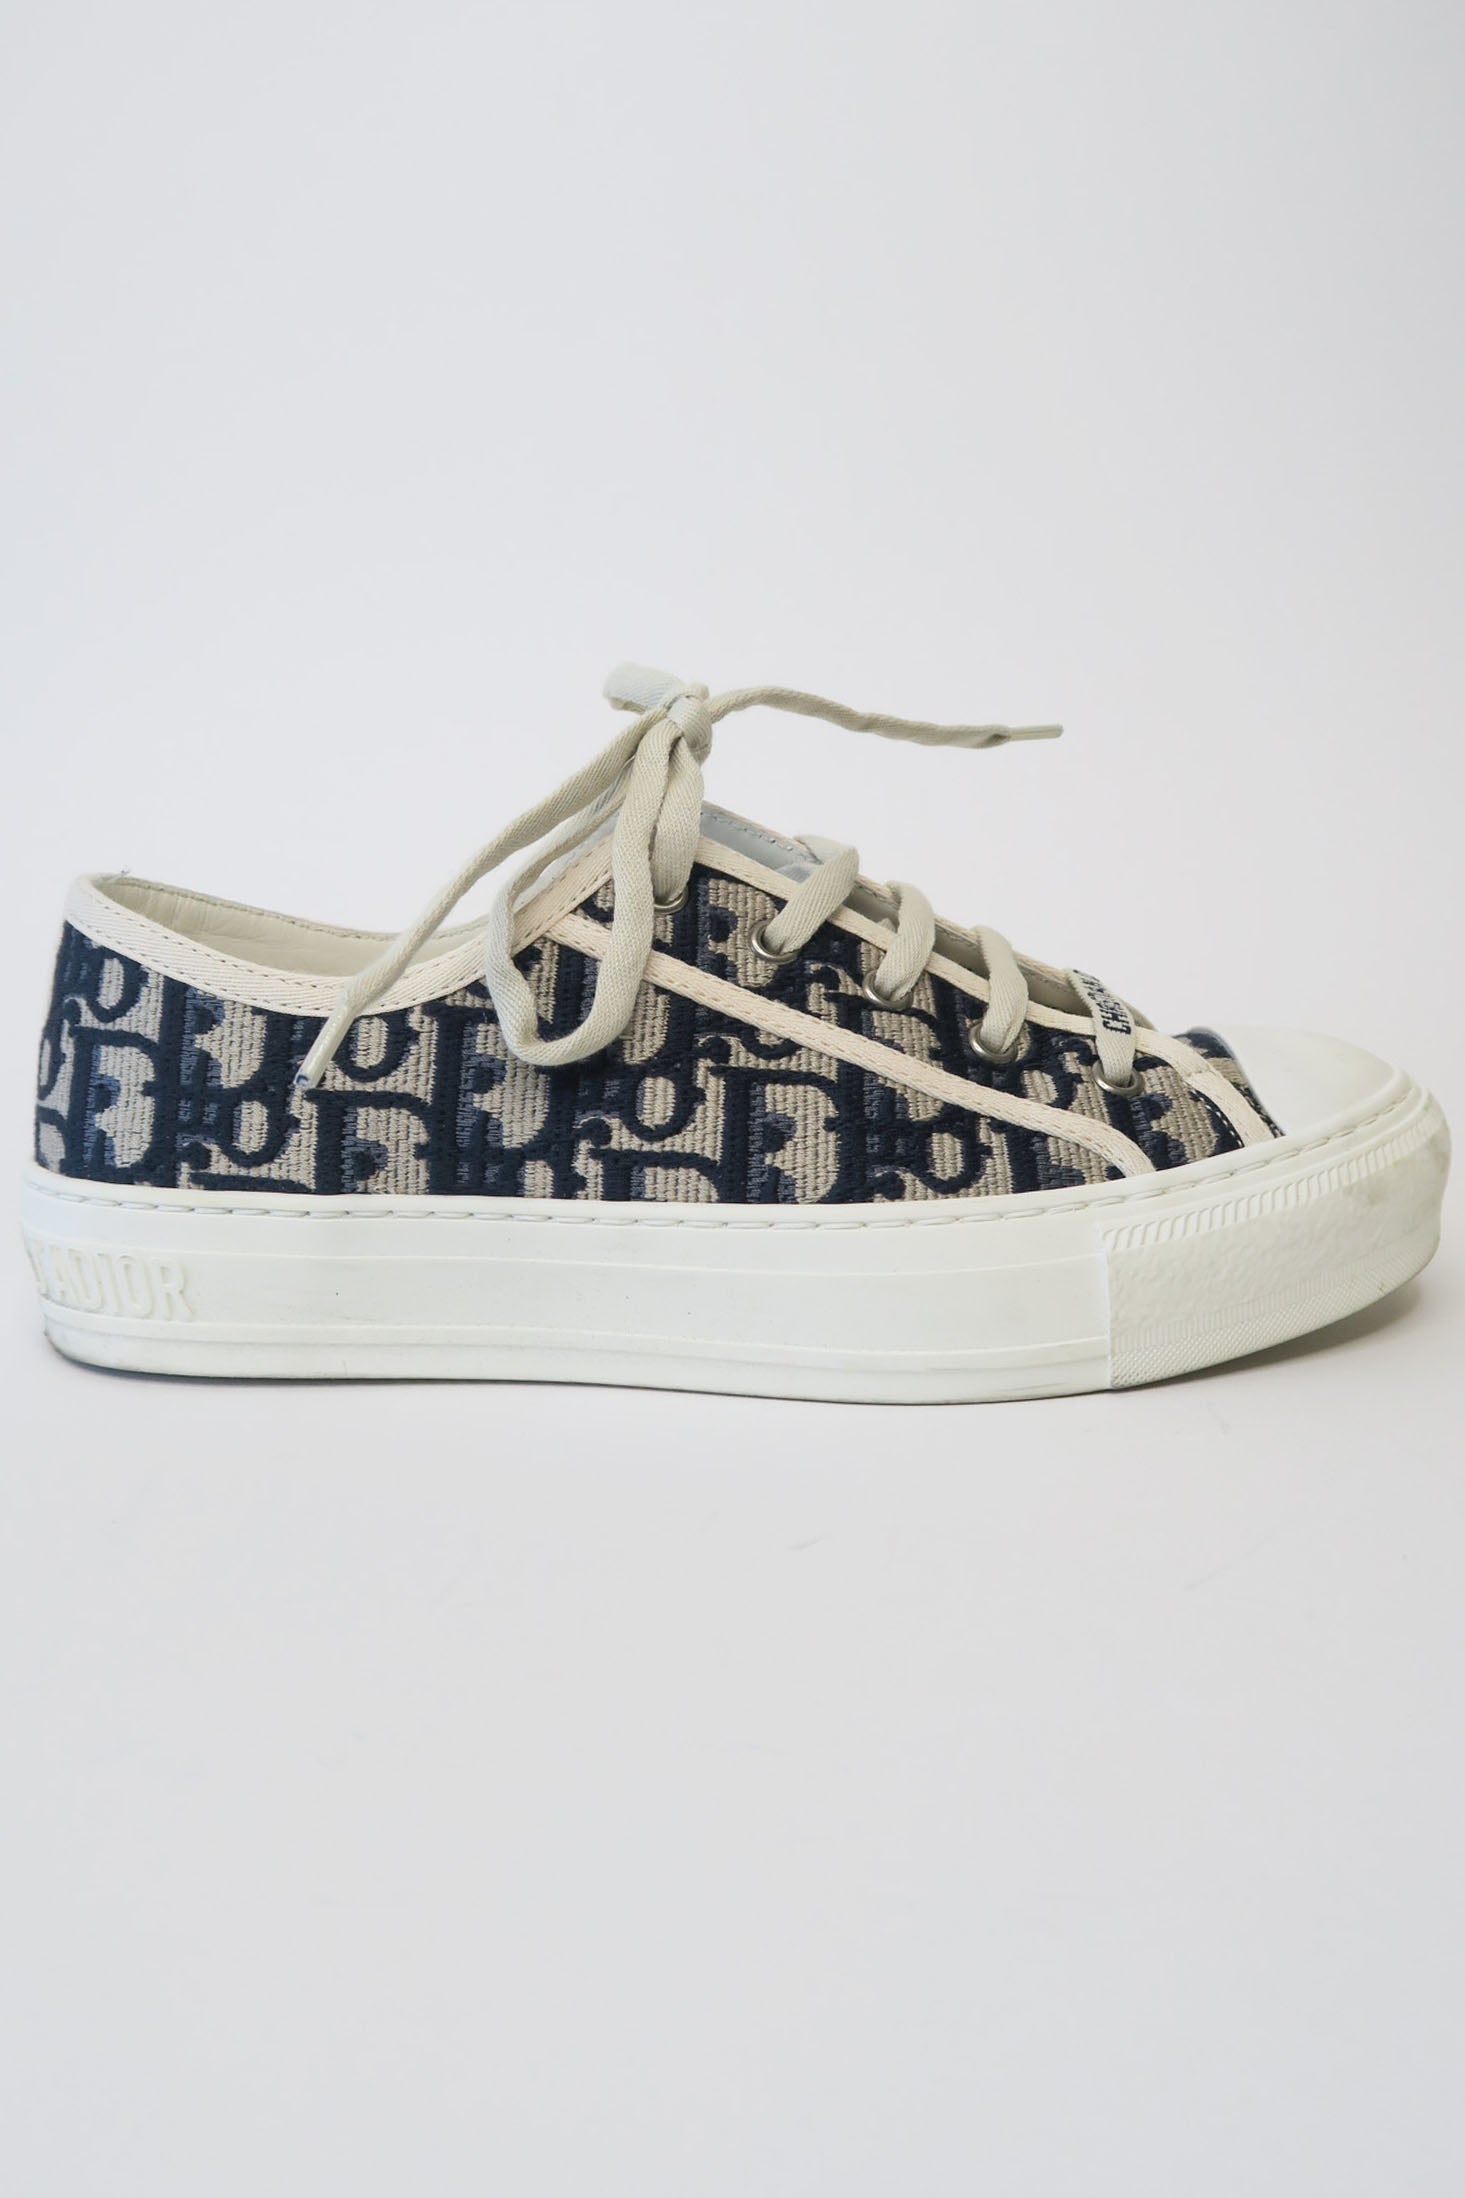 Christian Dior Canvas Printed Sneakers sz 37.5